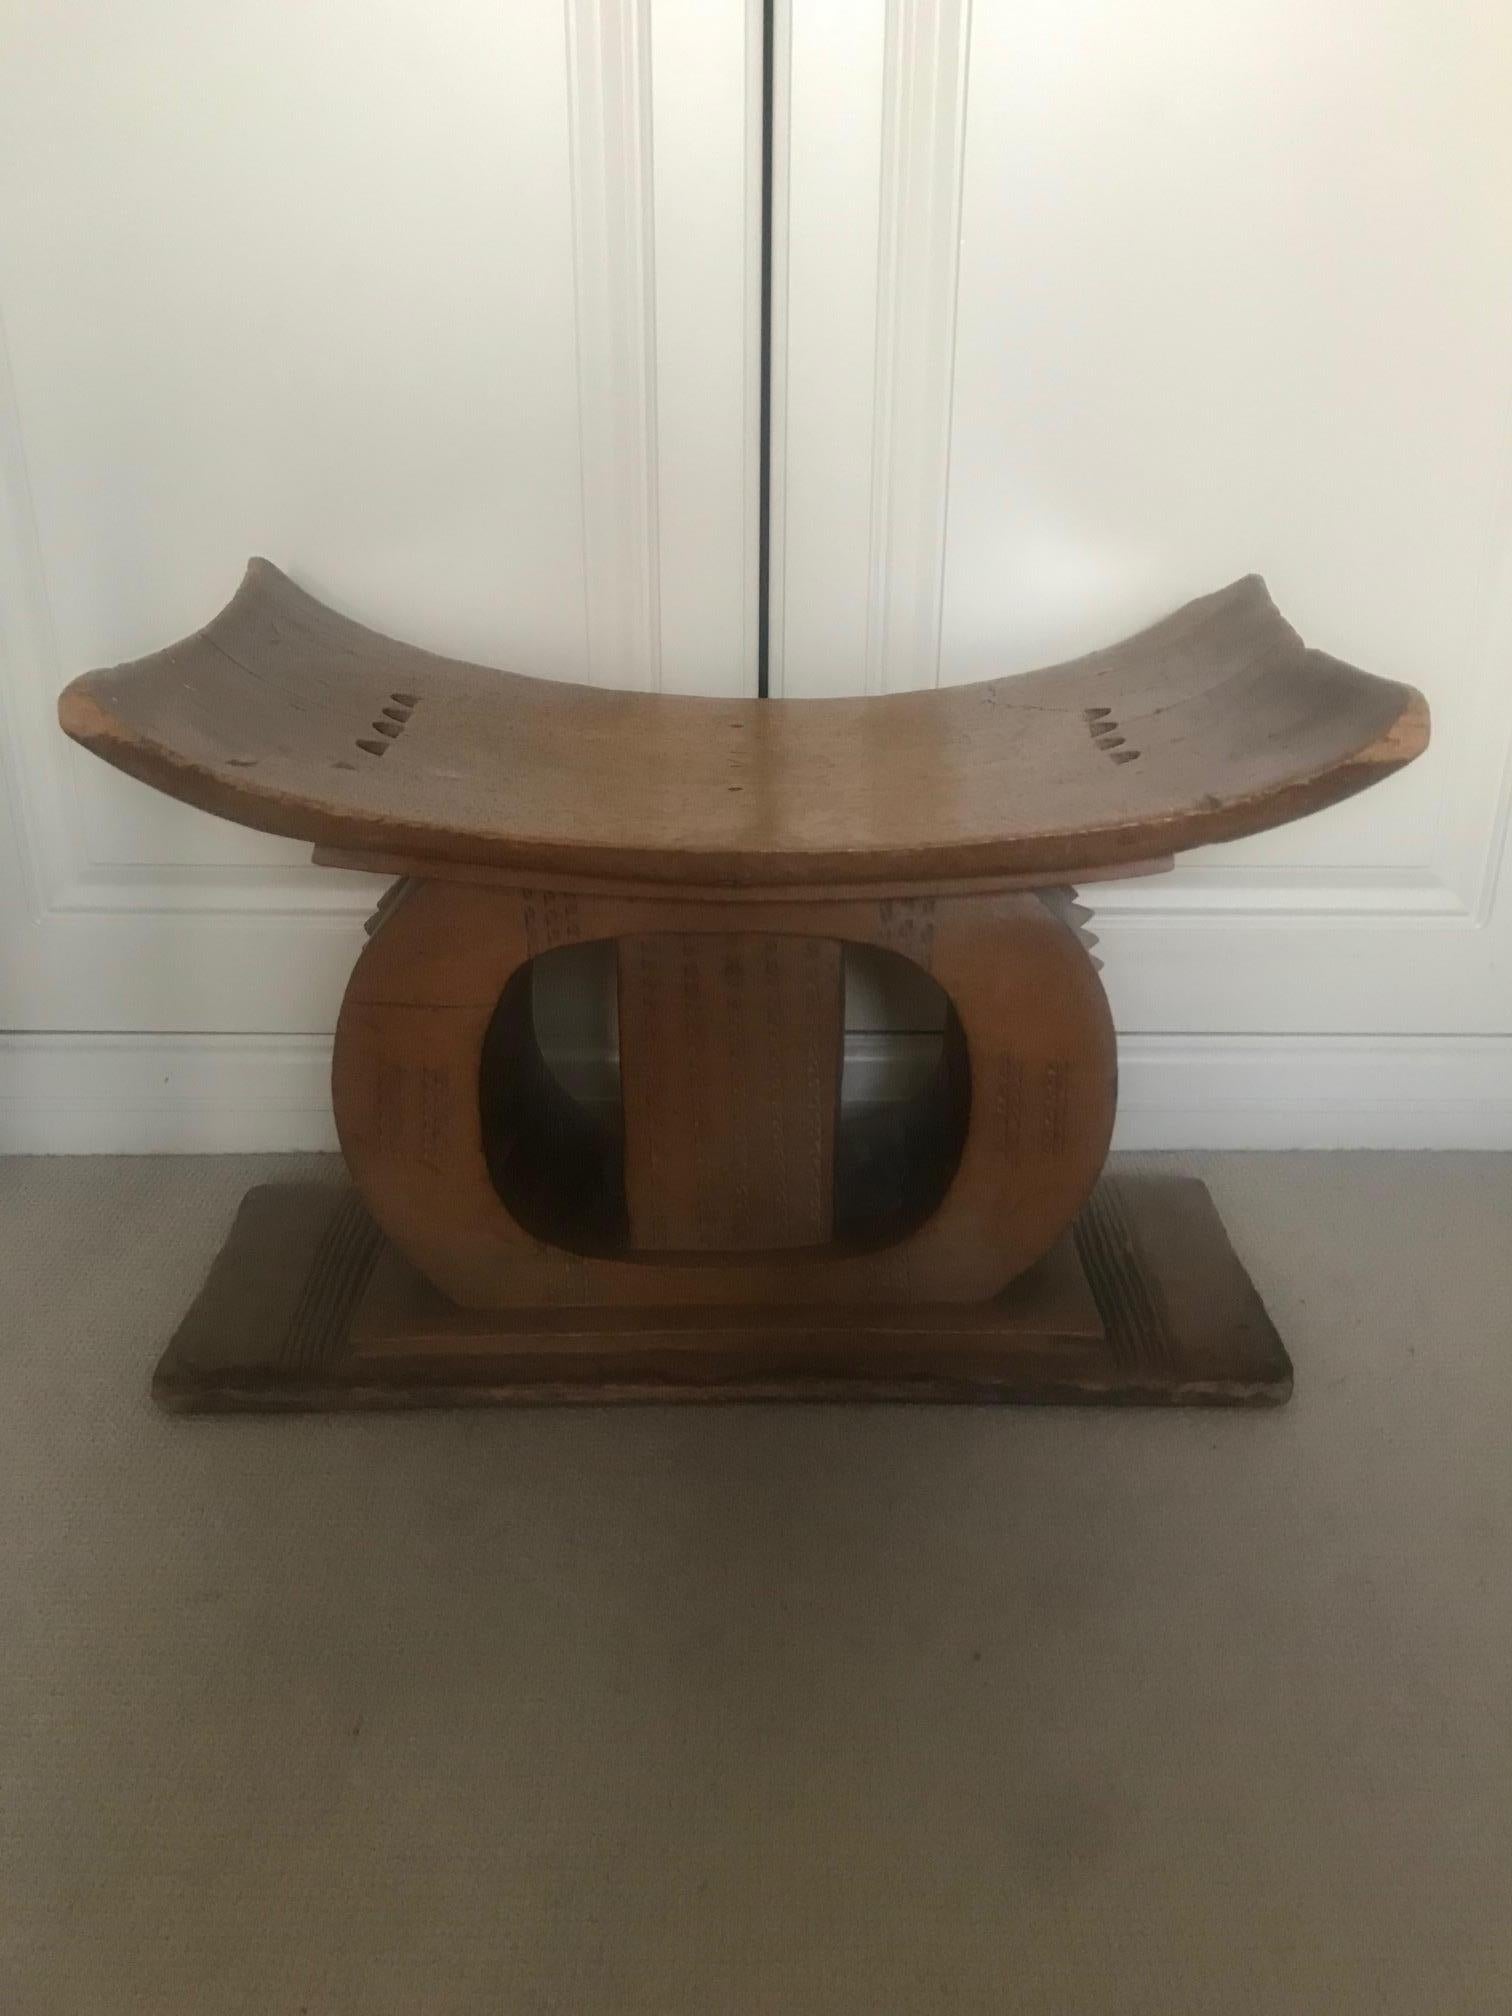 A mid-20th century tribal stool. Carved from one piece of wood, this stool was made by the Ashanti tribe from Ghana. Good patination and signs of genuine use.